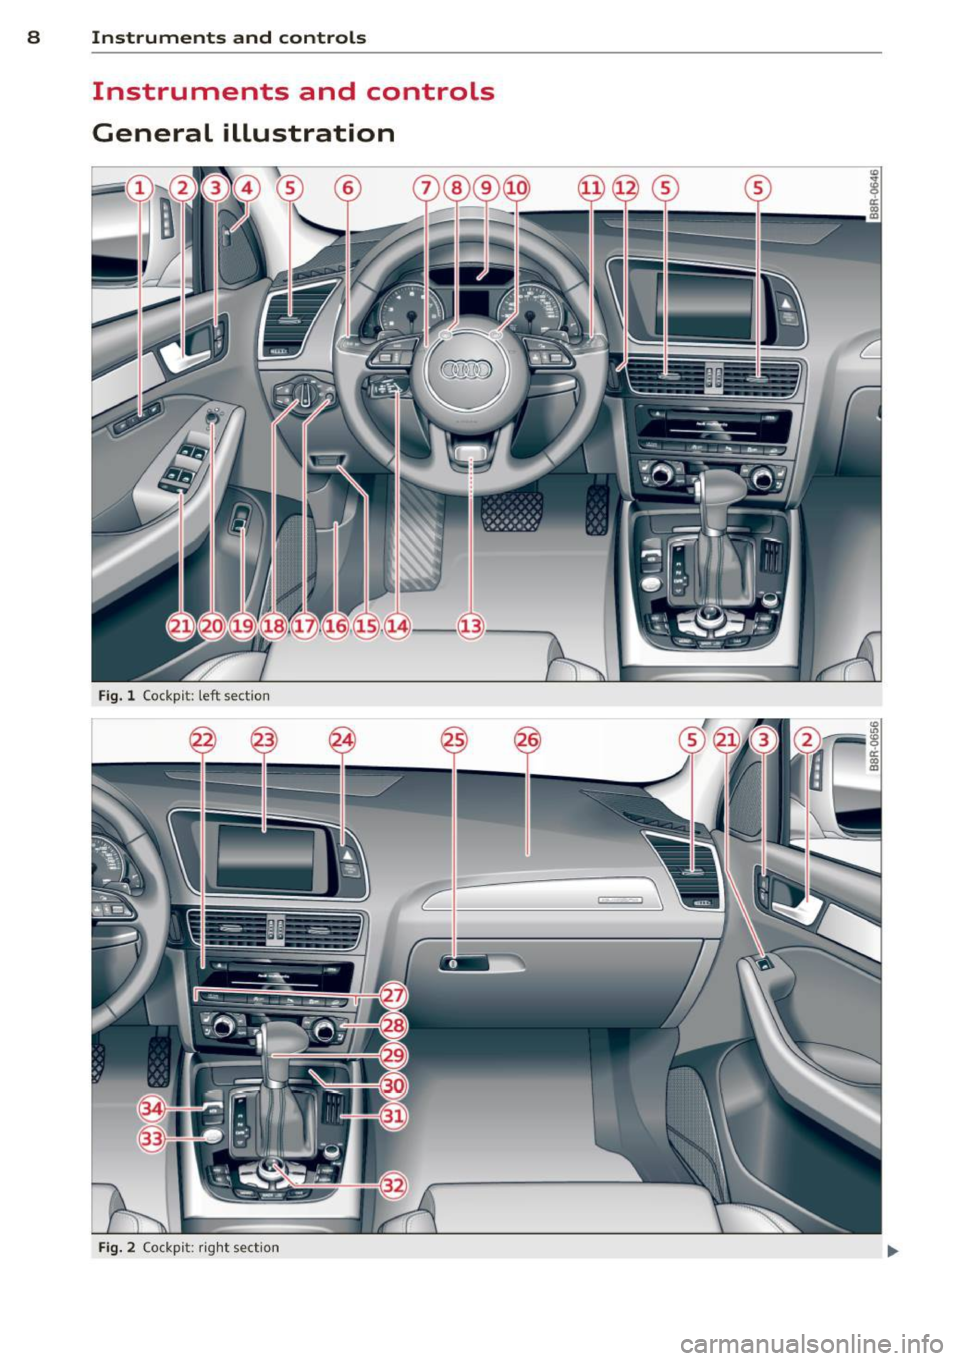 AUDI Q5 2013  Owners Manual 8  Instruments and controls 
Instruments  and  controls 
General  illustration 
Fig. l Cockp it:  left  sect io n 
Fig. 2 Co ck pi t: ri ght  sect io n  